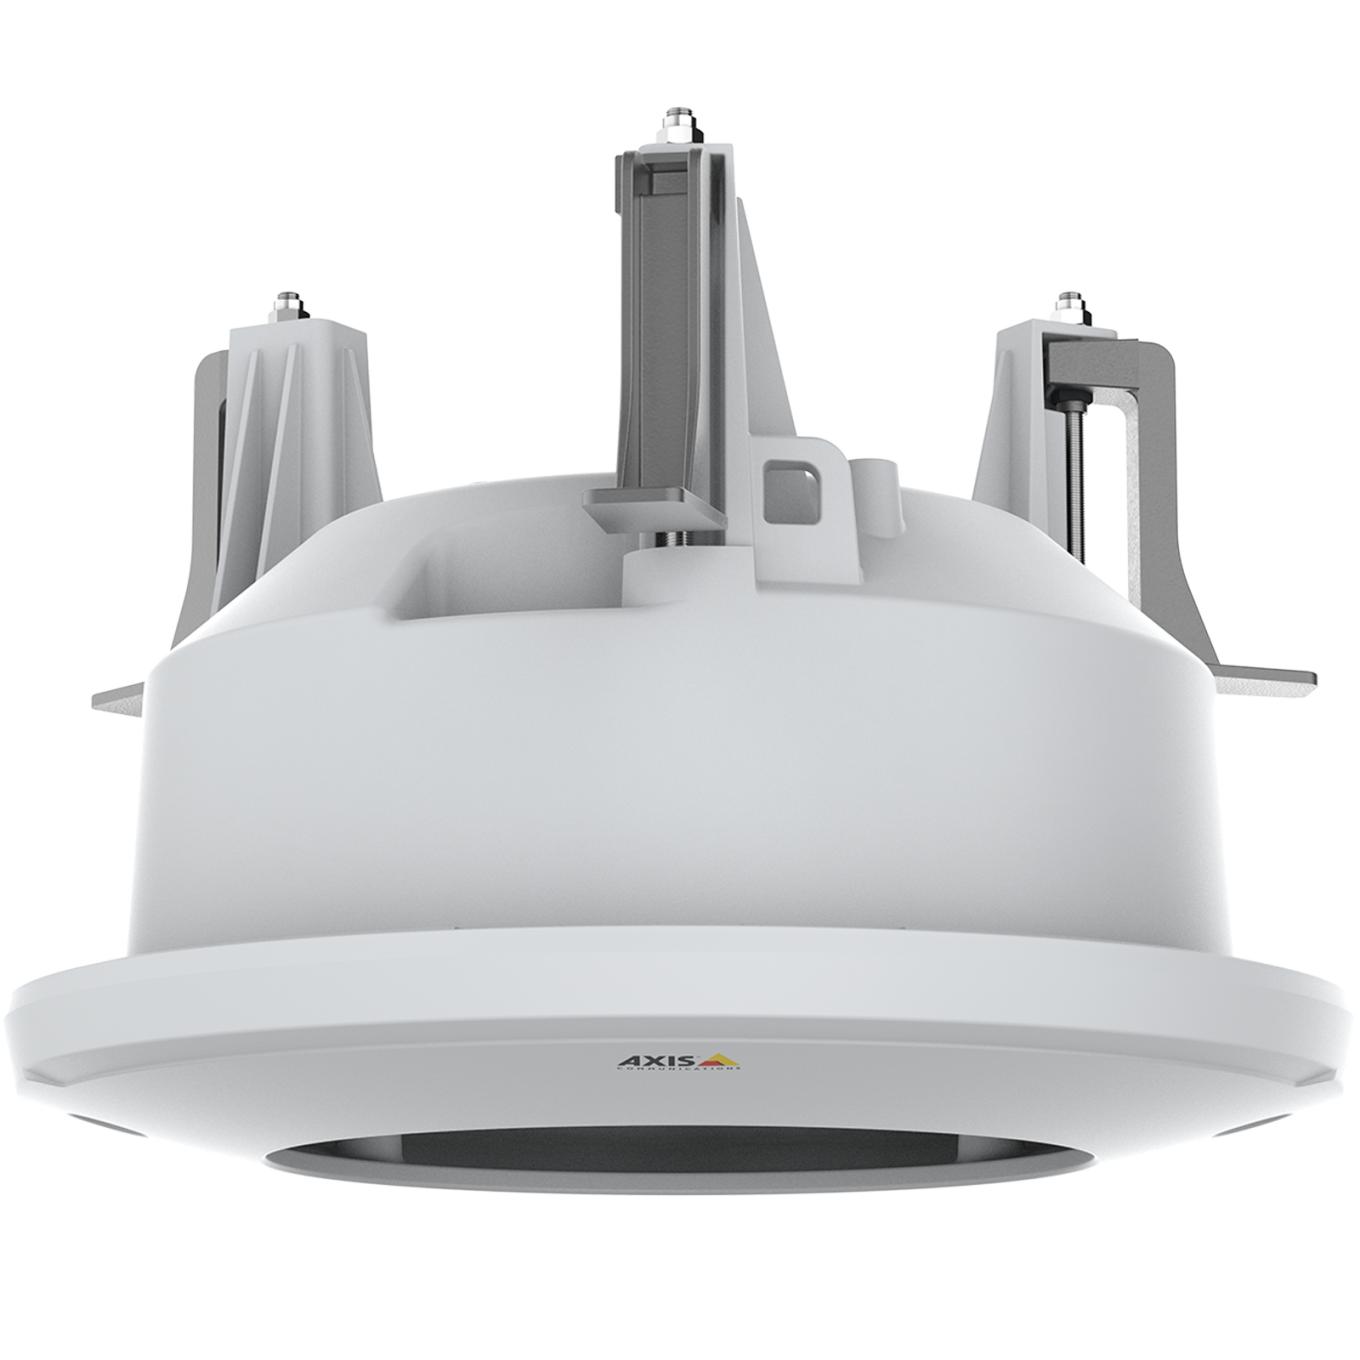 AXIS TQ3201-E Recessed Mount alone, without camera